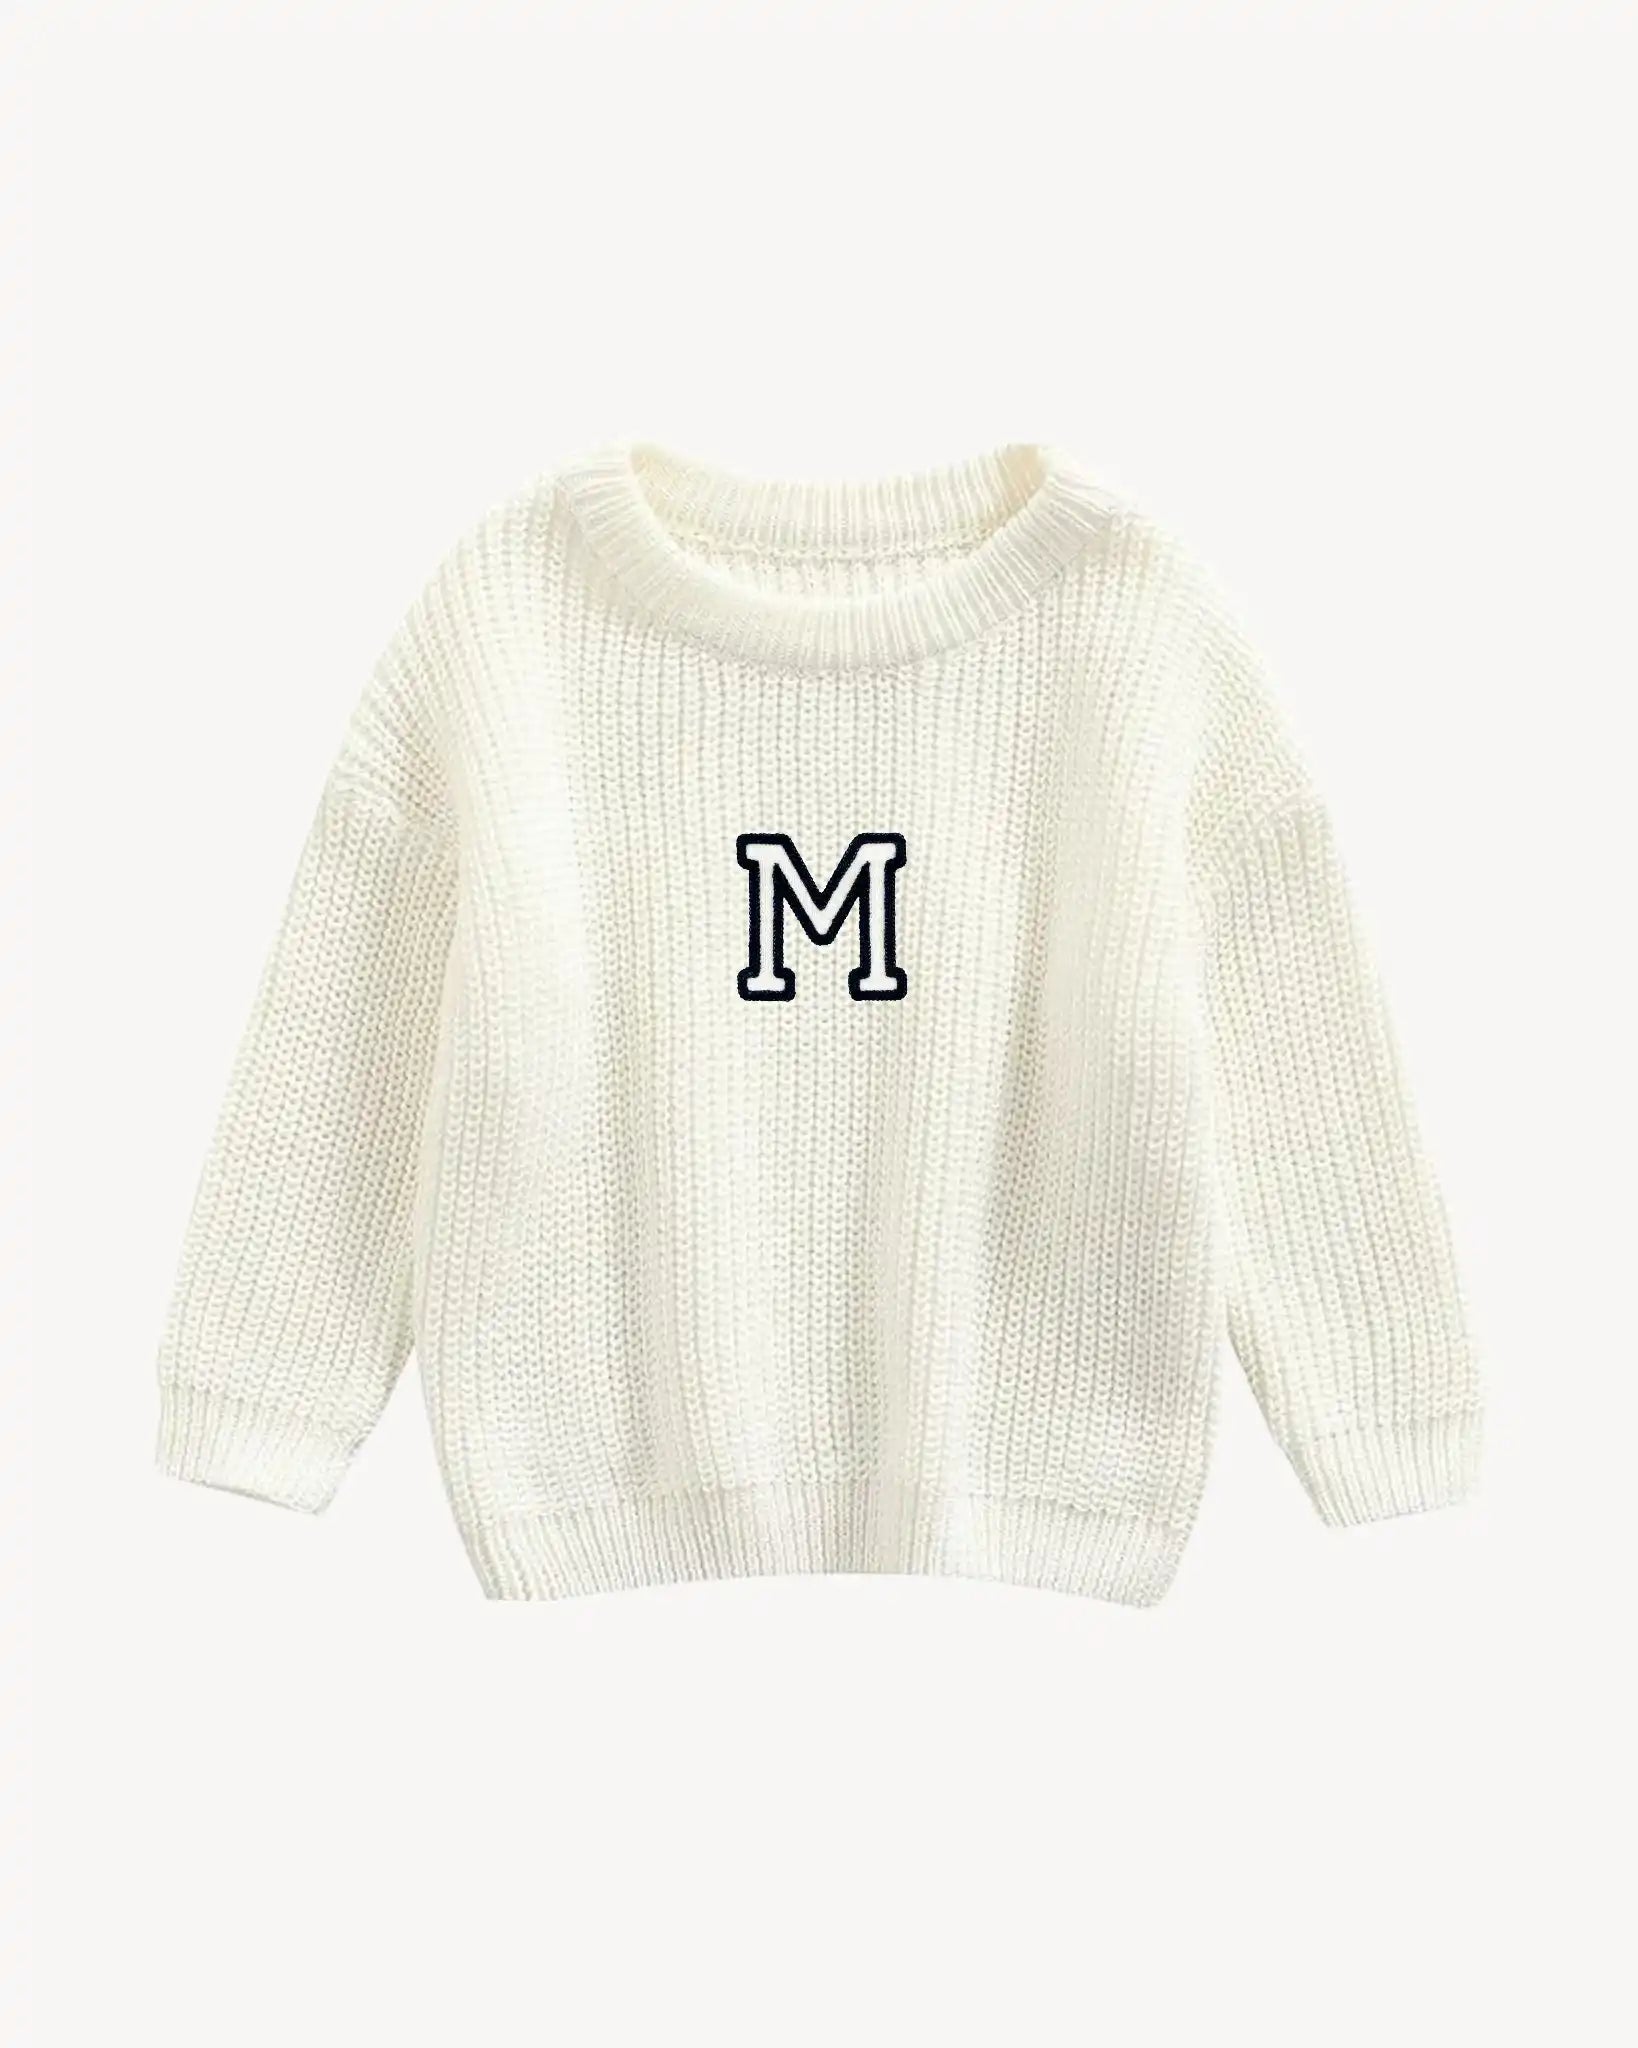 KIDS - JERSEY OFF WHITE | INICIAL MINI